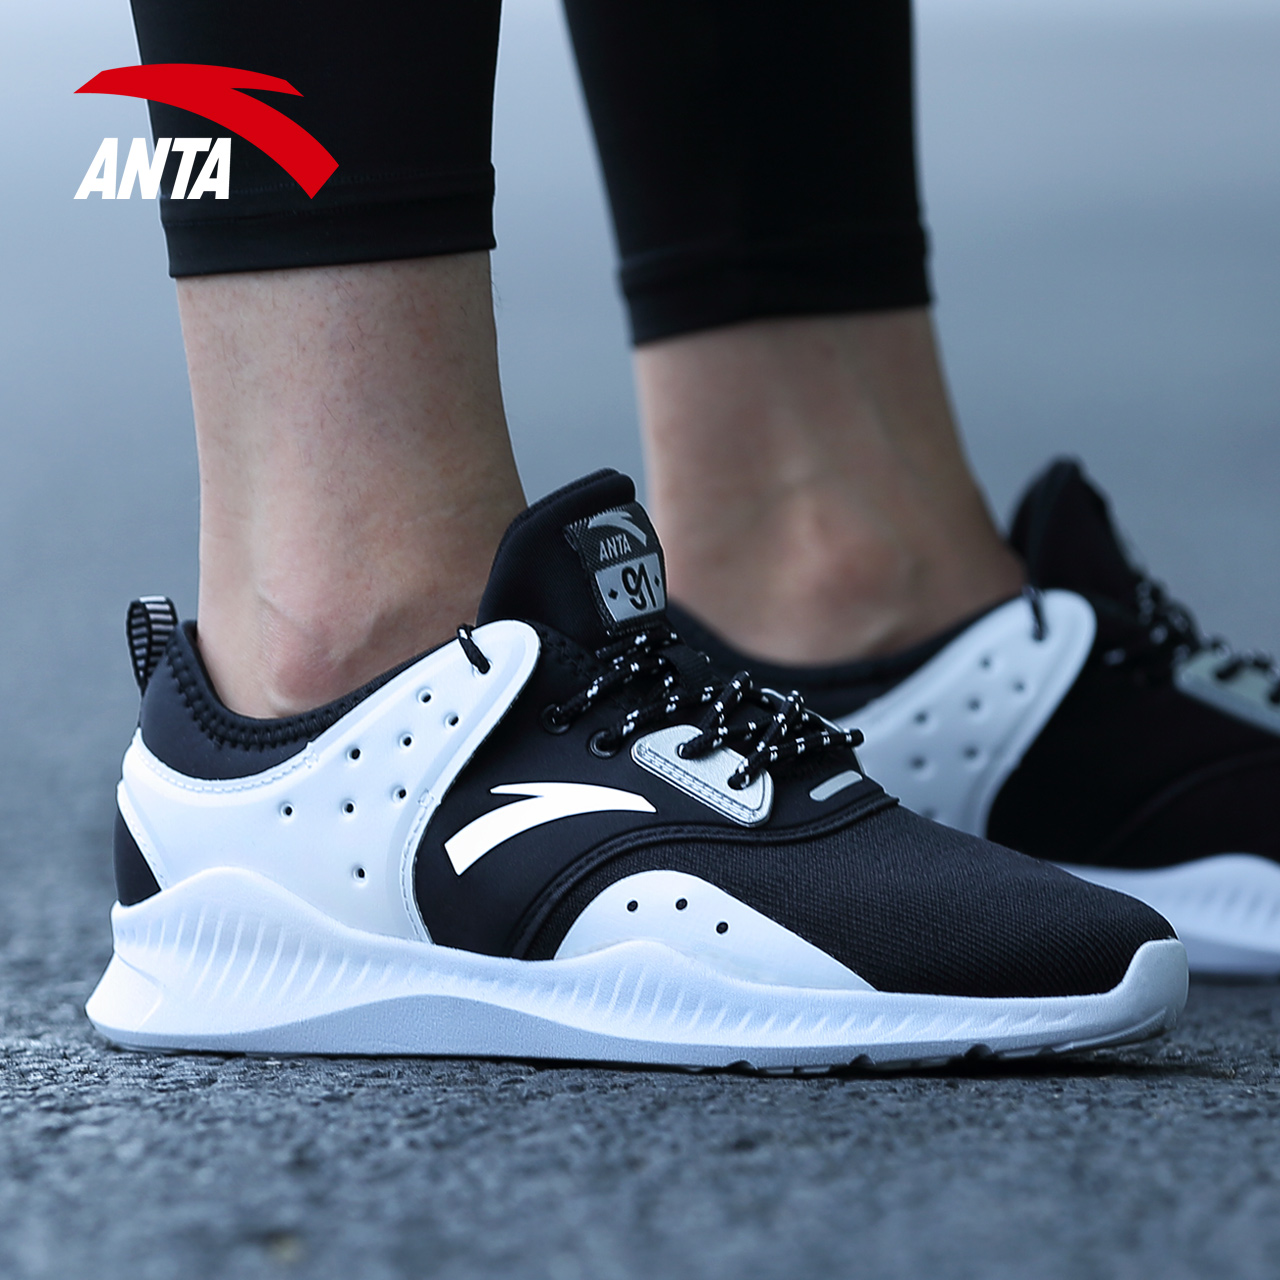 Anta Women's Shoes Sports Shoes Women's 2019 New Autumn Official Website Flagship Running Shoes Women's Off Size Casual Shoes